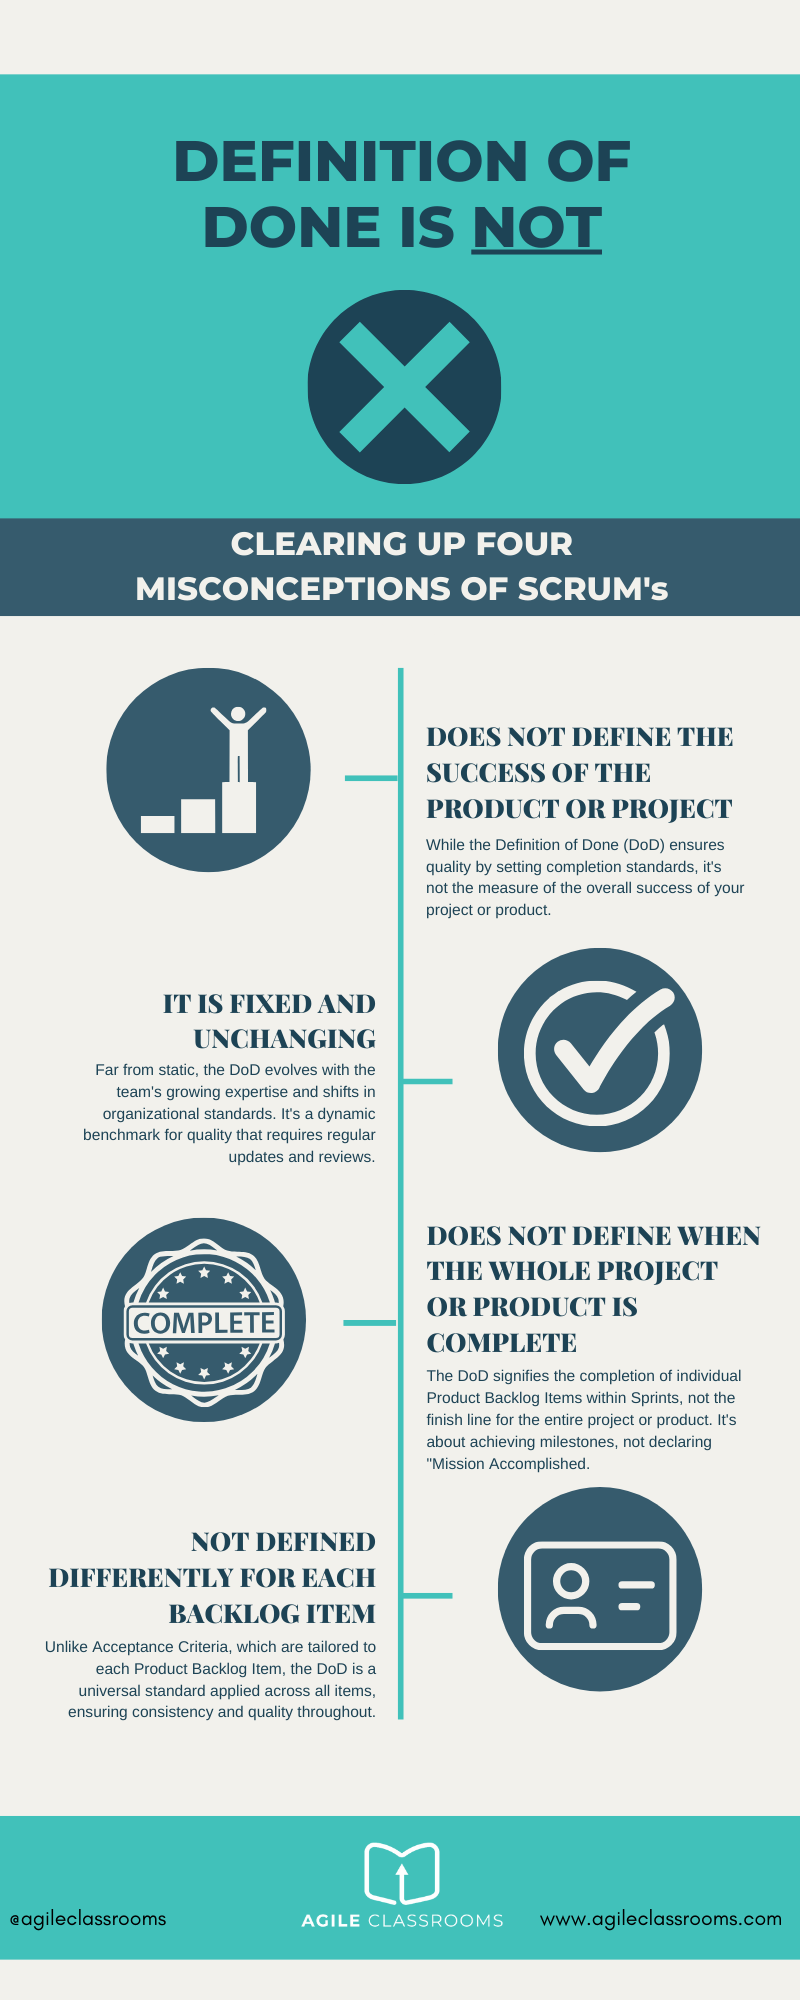  Infographic titled 'Definition of Done is Not', clarifying four misconceptions of Scrum's Definition of Done (DoD). Misconception 1: DoD is fixed and unchanging; correction - it evolves with team expertise and organizational standards. Misconception 2: DoD defines the success of the product or project; correction - it sets completion standards but is not the measure of overall success. Misconception 3: DoD defines when the whole project or product is complete; correction - it signifies completion of individual Product Backlog Items, not the entire project. Misconception 4: DoD is defined differently for each backlog item; correction - unlike Acceptance Criteria, the DoD is a universal standard ensuring consistency and quality. Infographic by Agile Classrooms, www.agileclassrooms.com